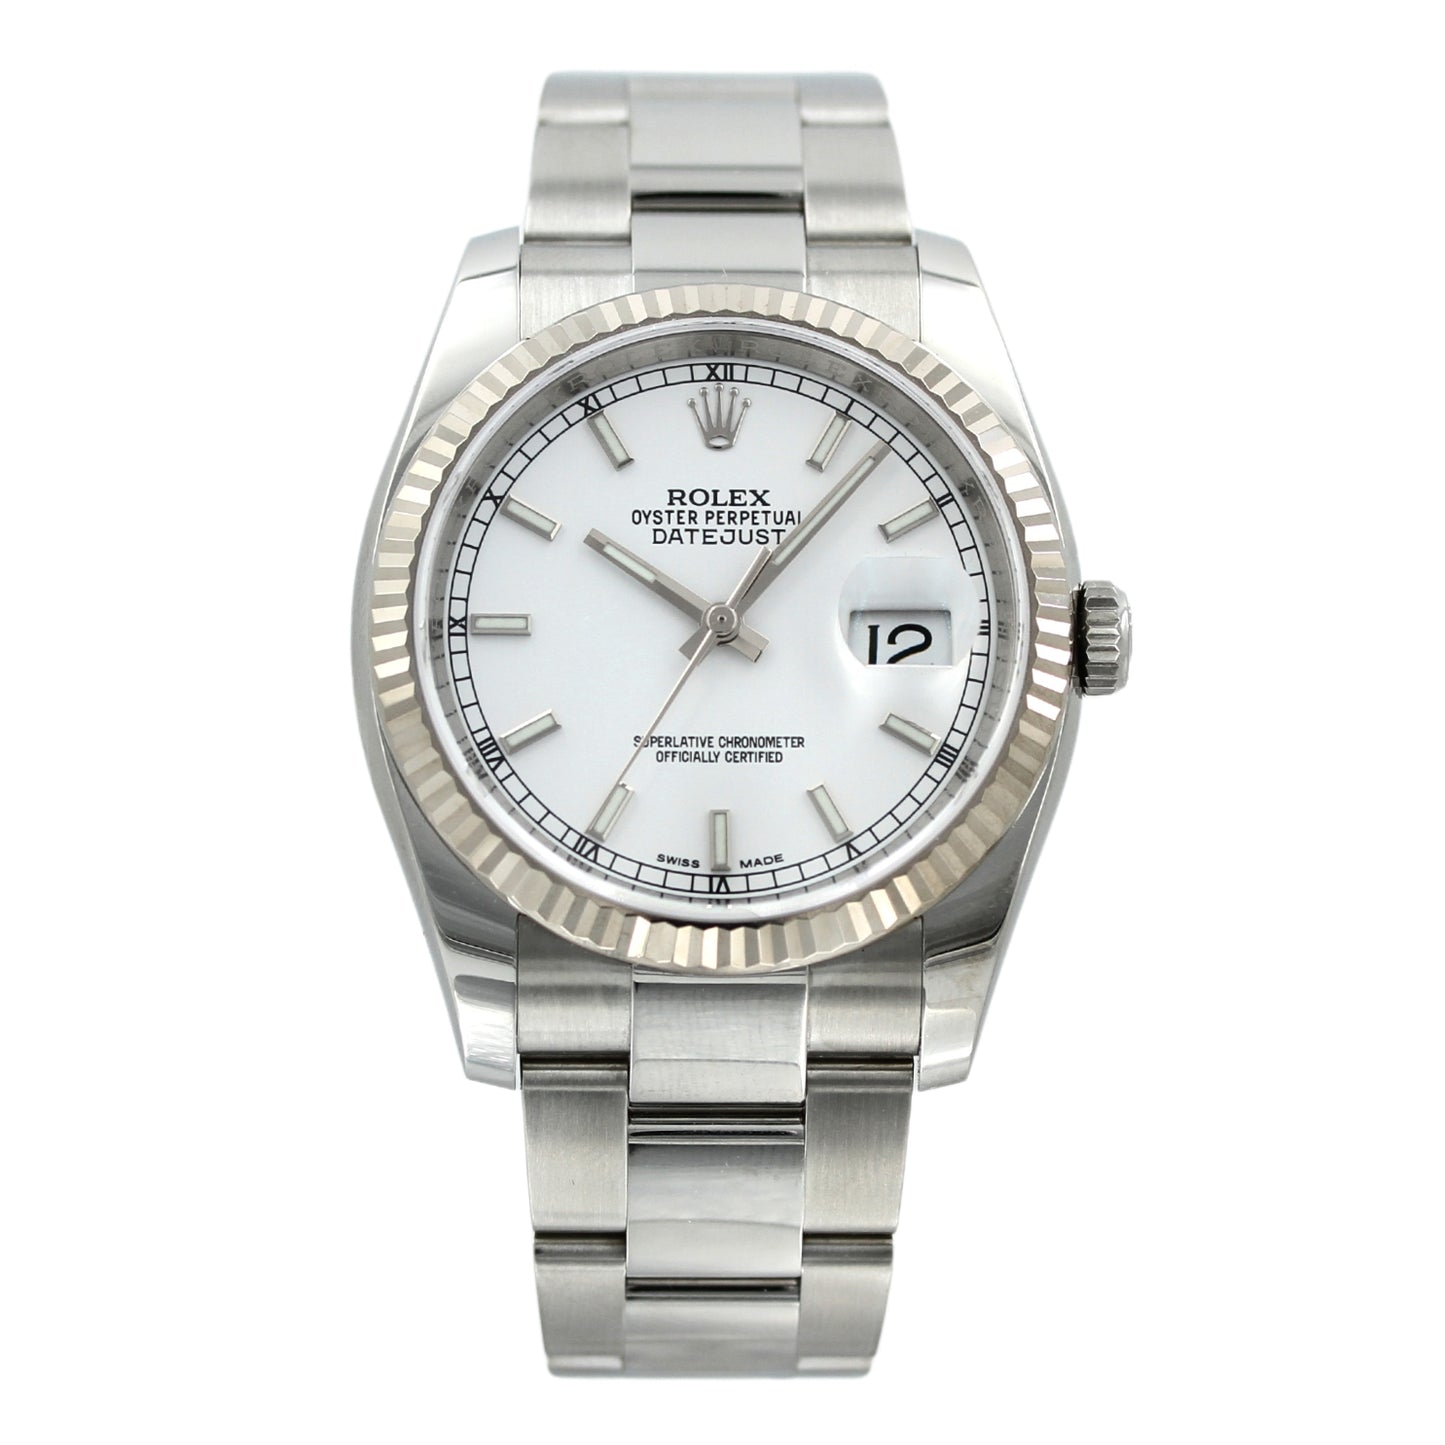 Rolex Datejust 36, White Dial, Oyster, Ref. 116234, B+P